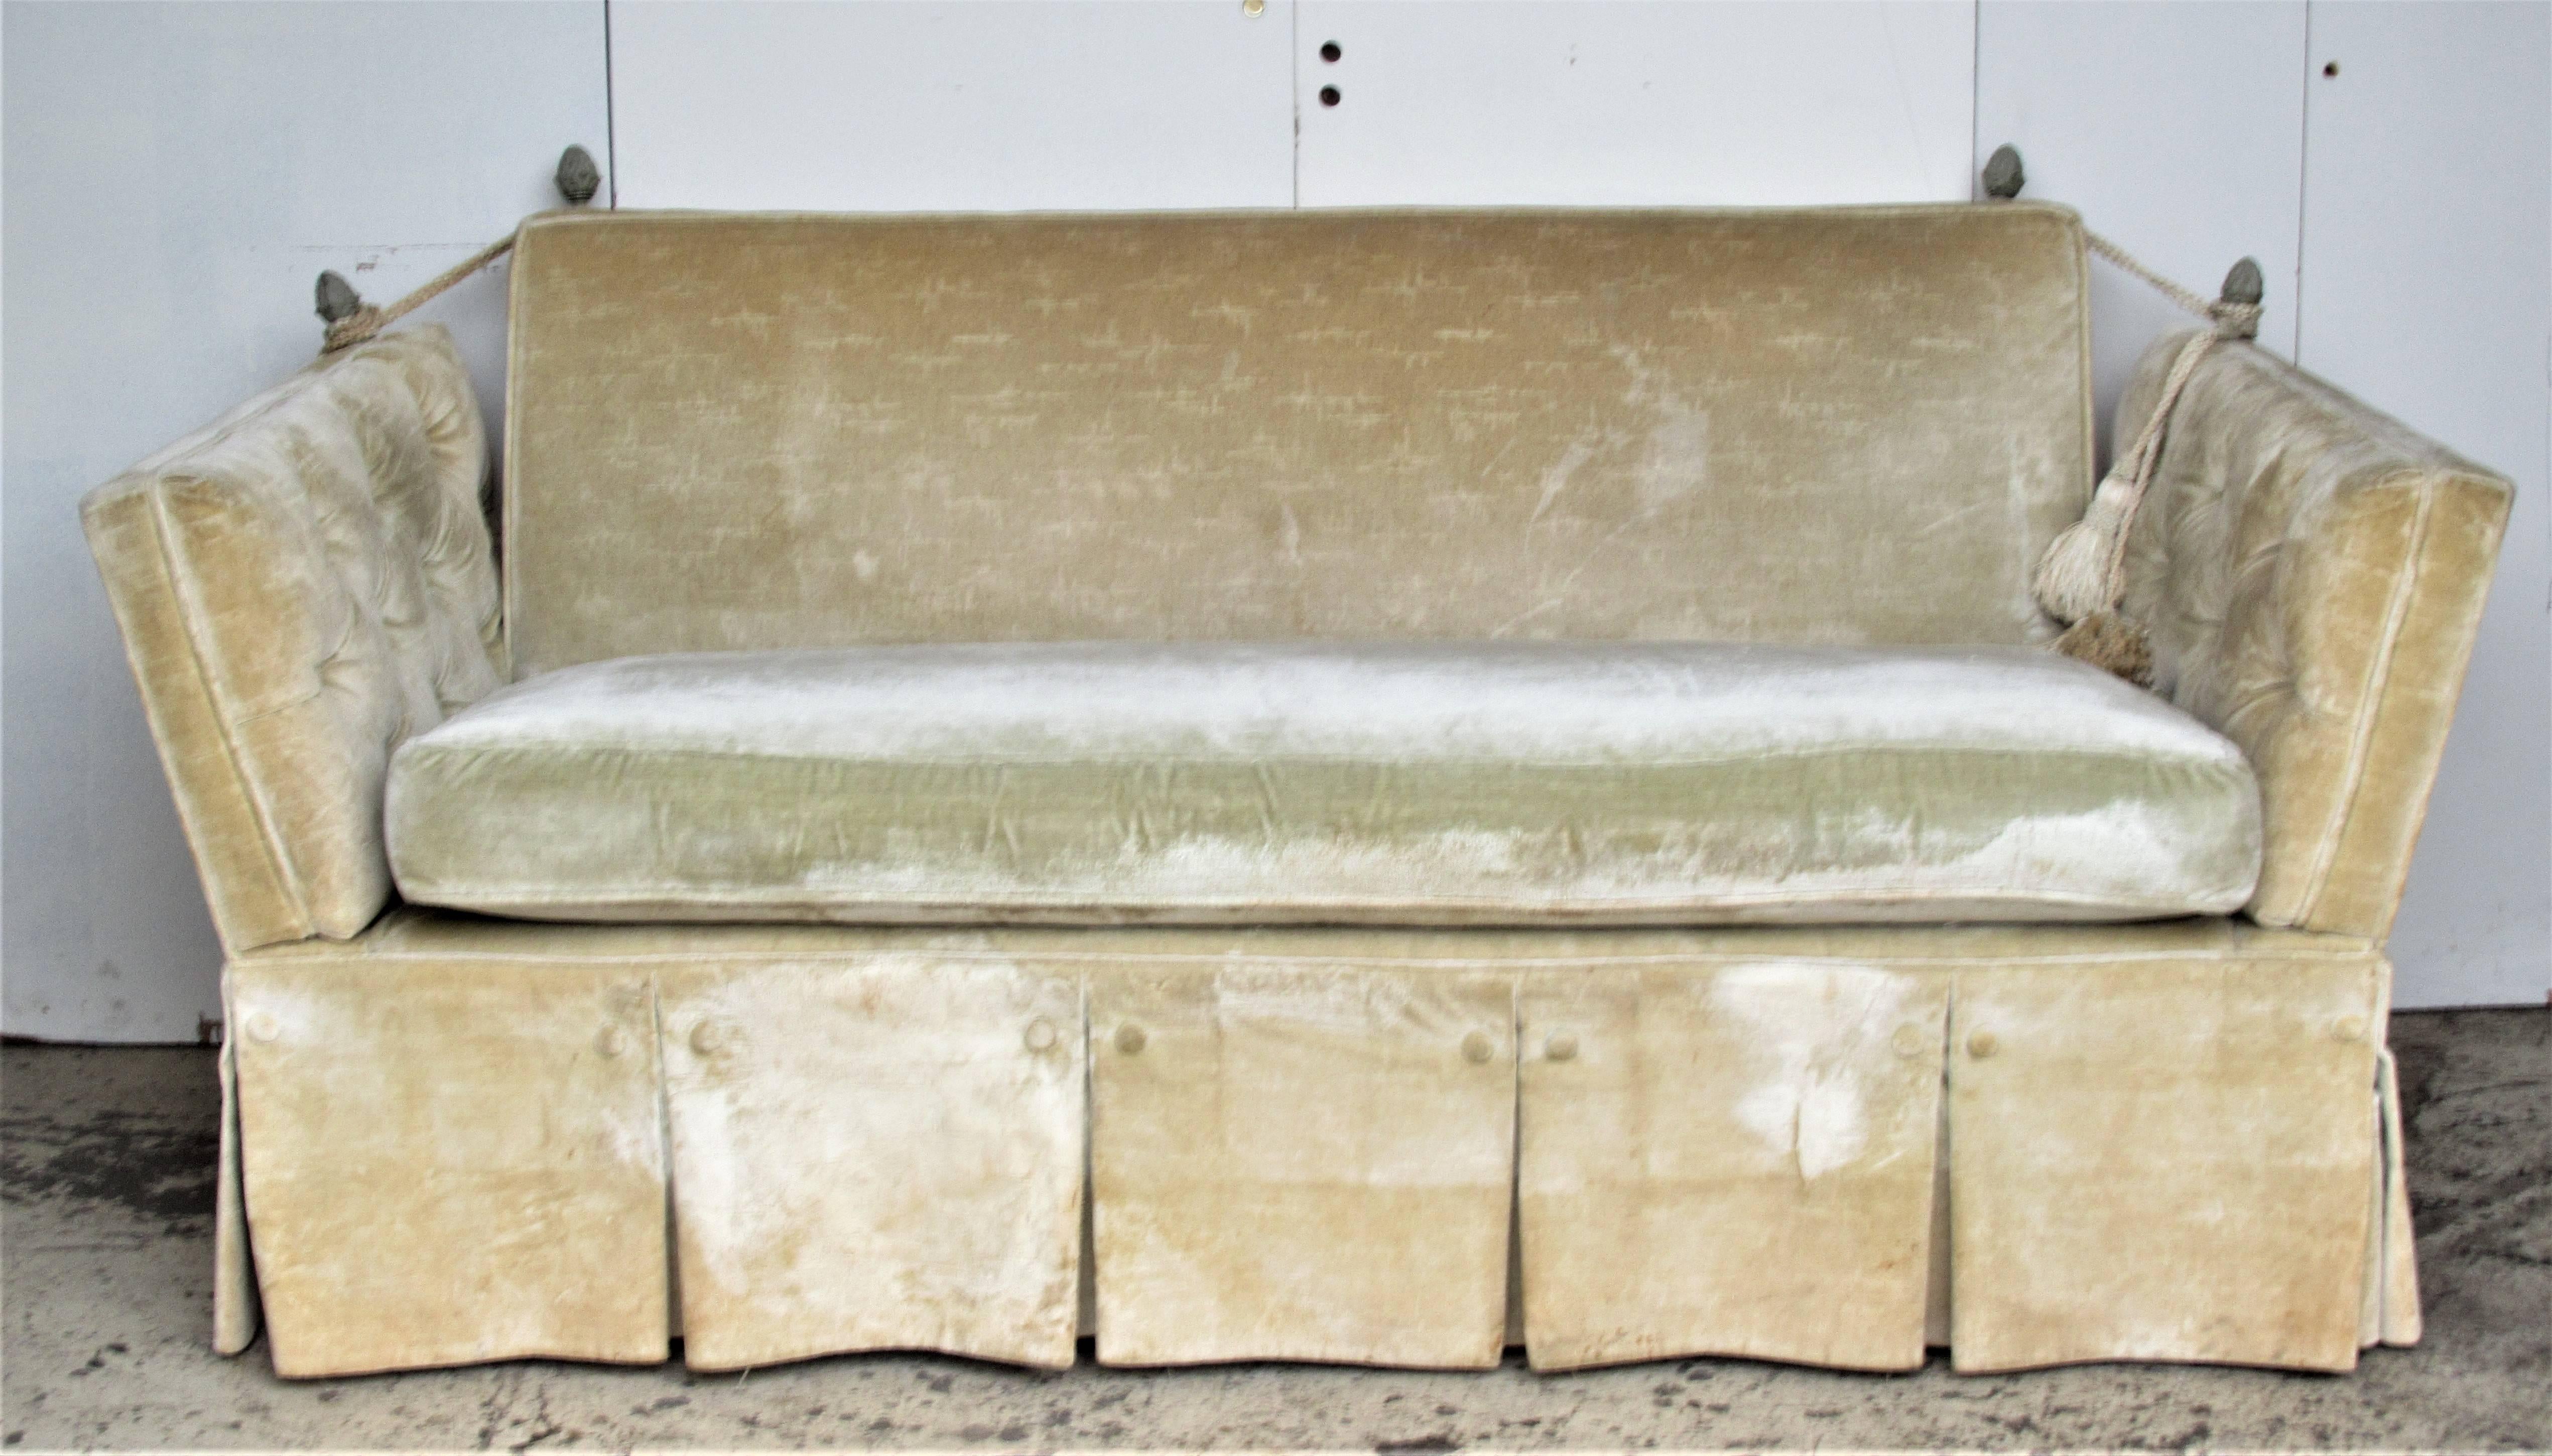 Classic antique English style Knole button tufted sofa in original pale vellum colored cotton velvet upholstery / the tailored skirt is fully buttoned at all four sides concealing four square nicely tapered wood legs / old pale gray painted brass